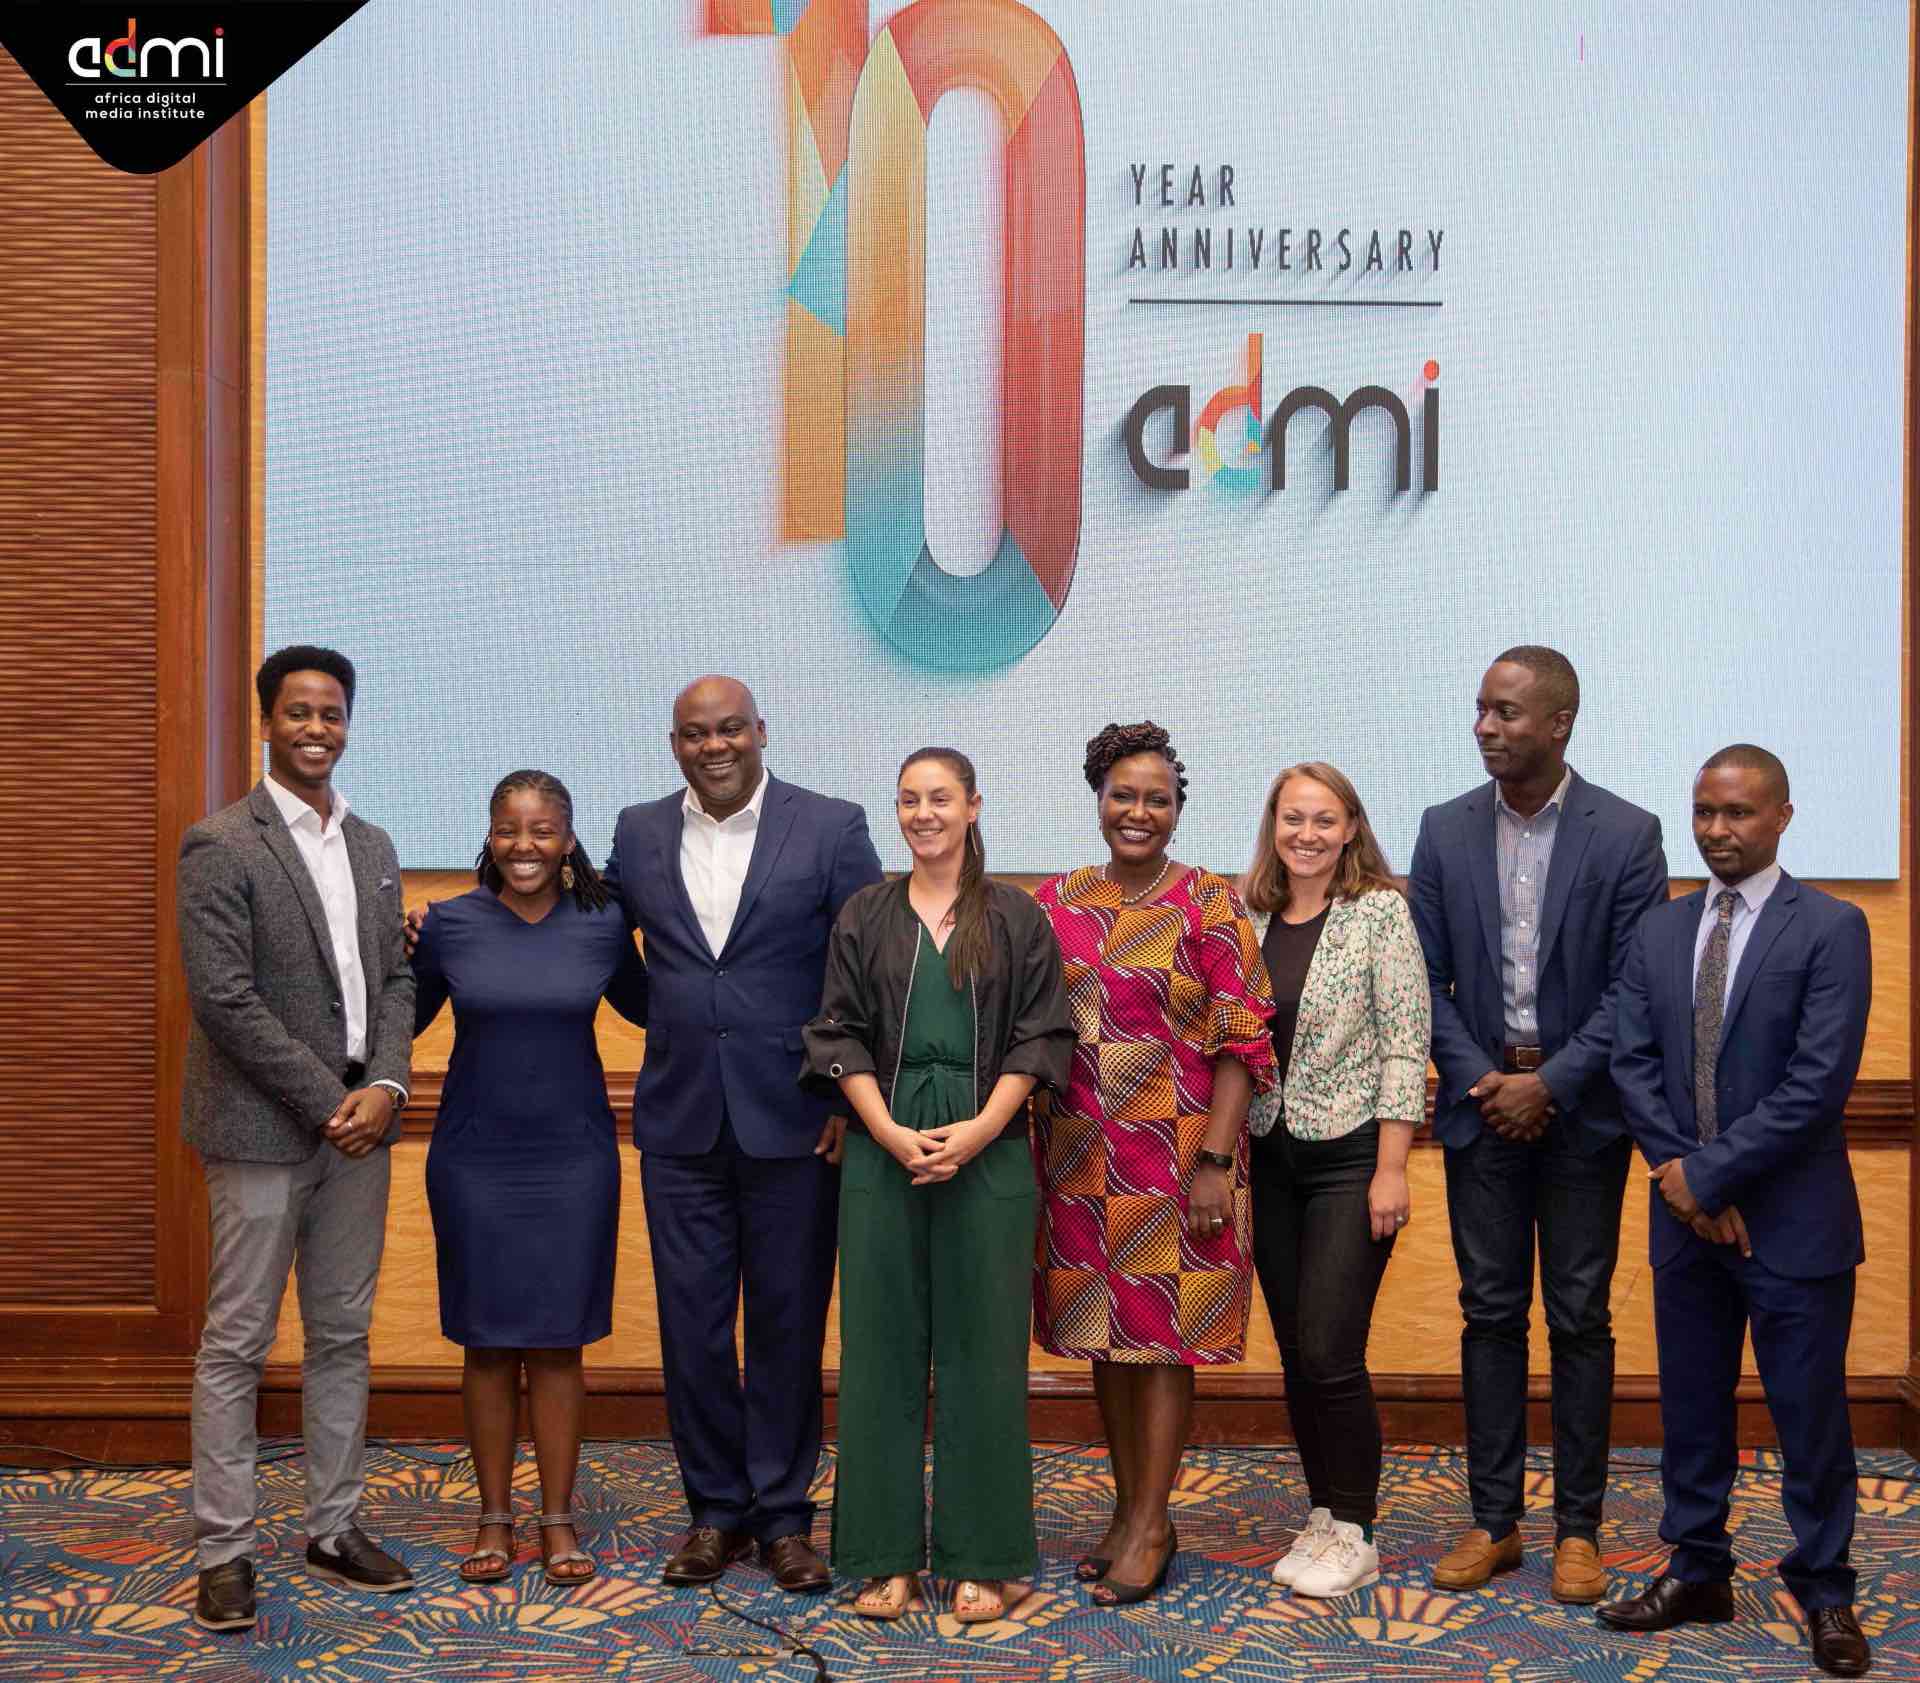 To celebrate the ADMI 10th Anniversary stakeholders donors and partners had a corporate breakfast on 25th February 2022